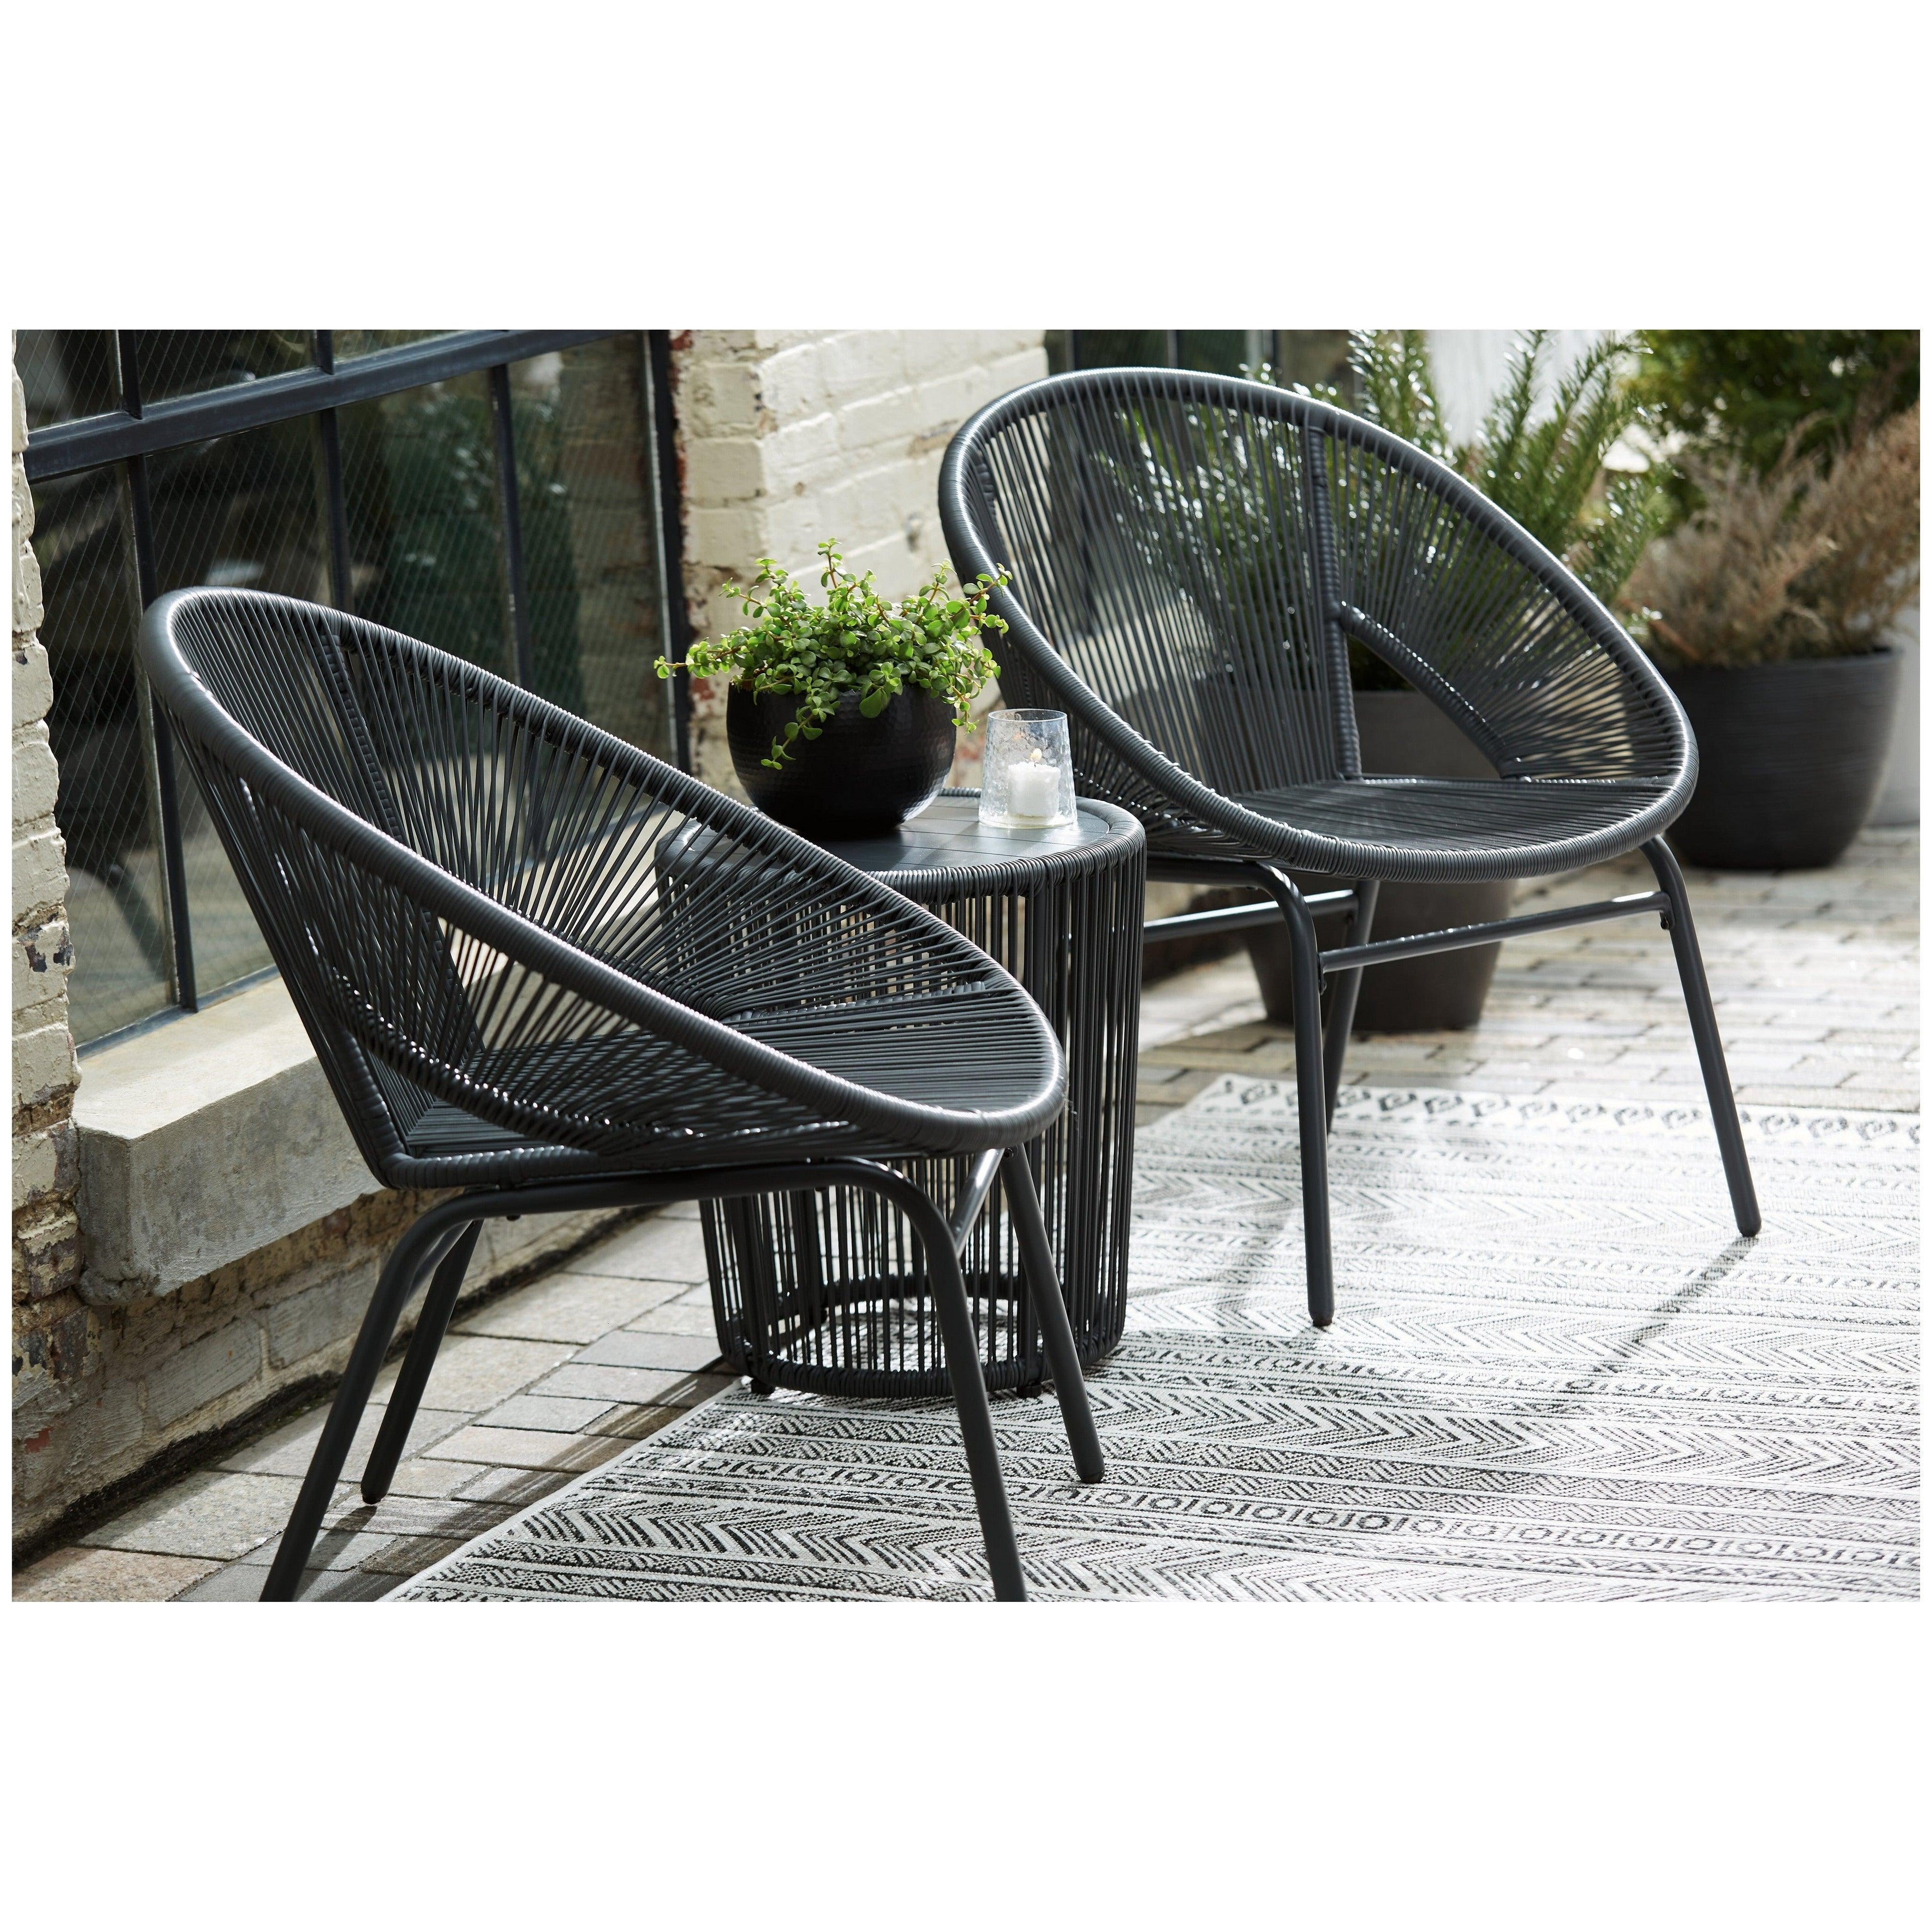 Mandarin Cape Outdoor Table and Chairs (Set of 3) Ash-P312-049